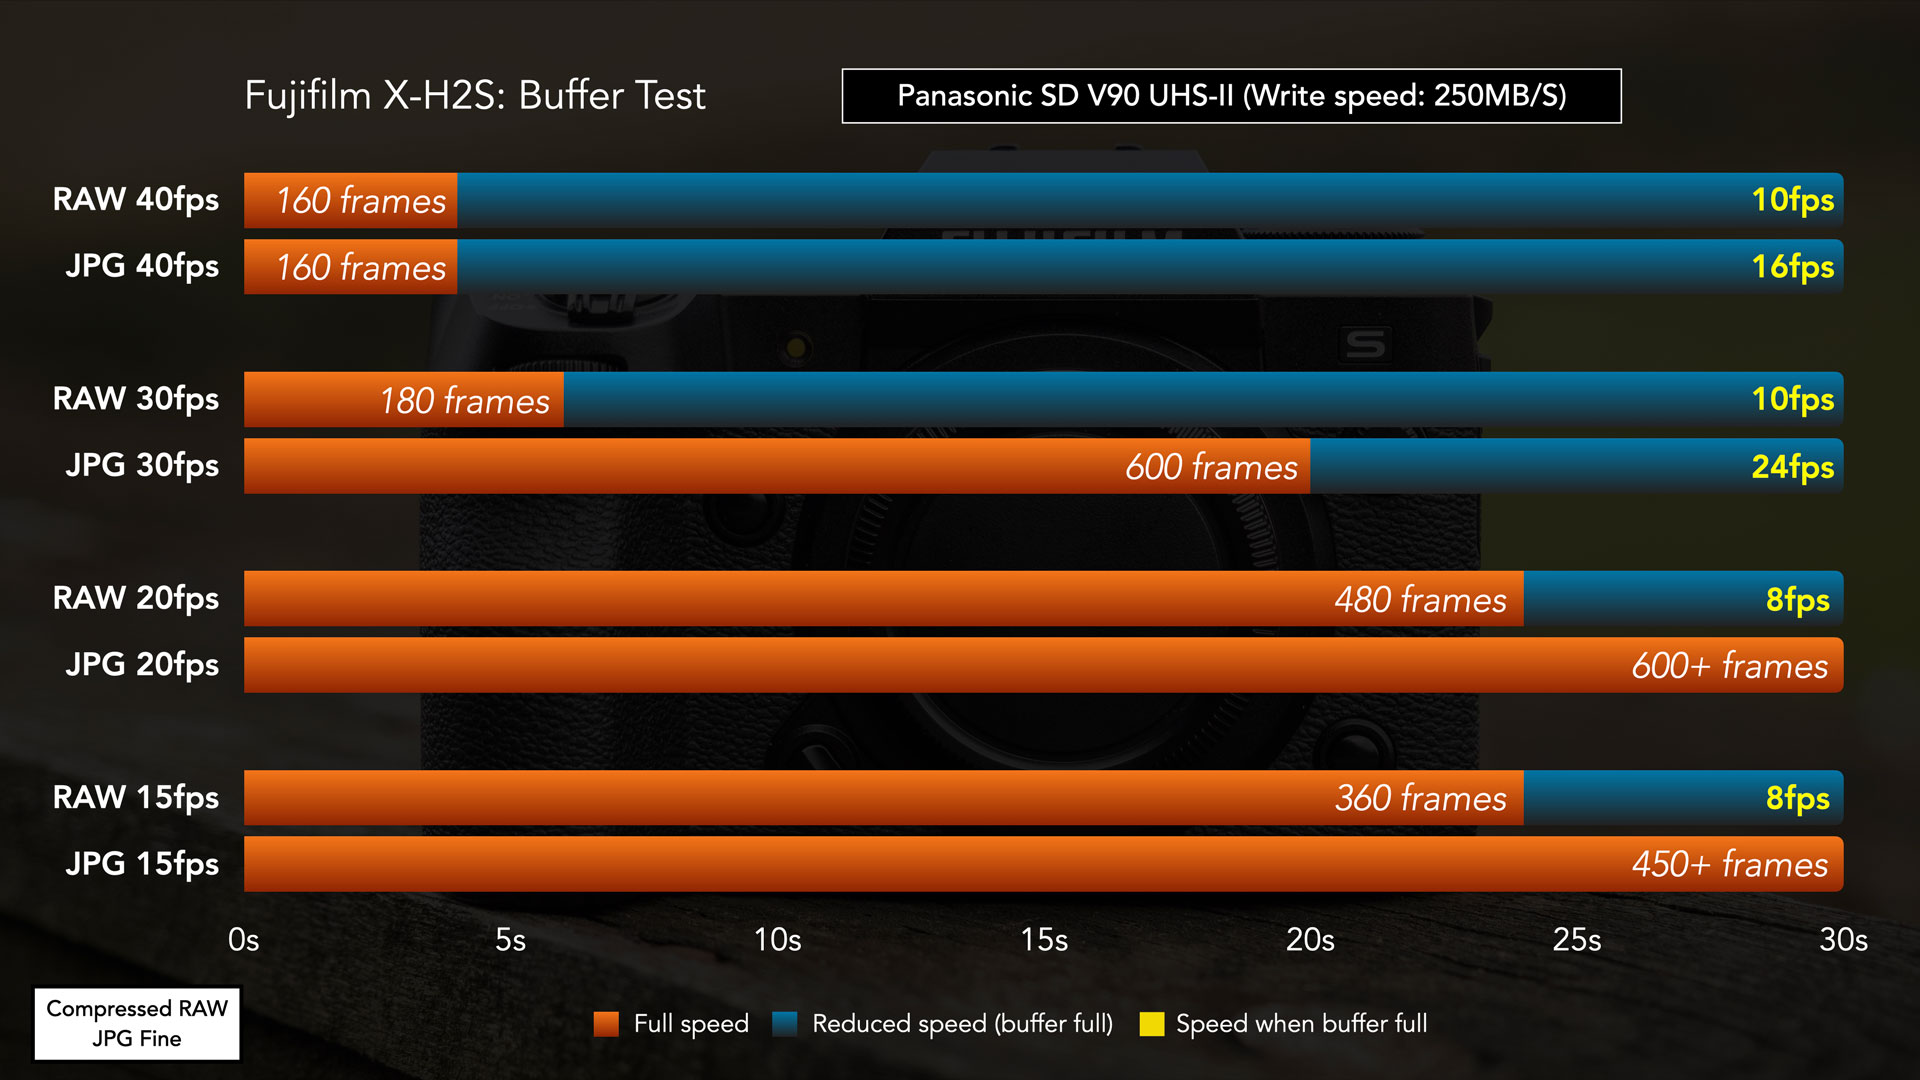 Chart showing the results of the buffer test with the Fuji X-H2S and the Panasonic SD card.